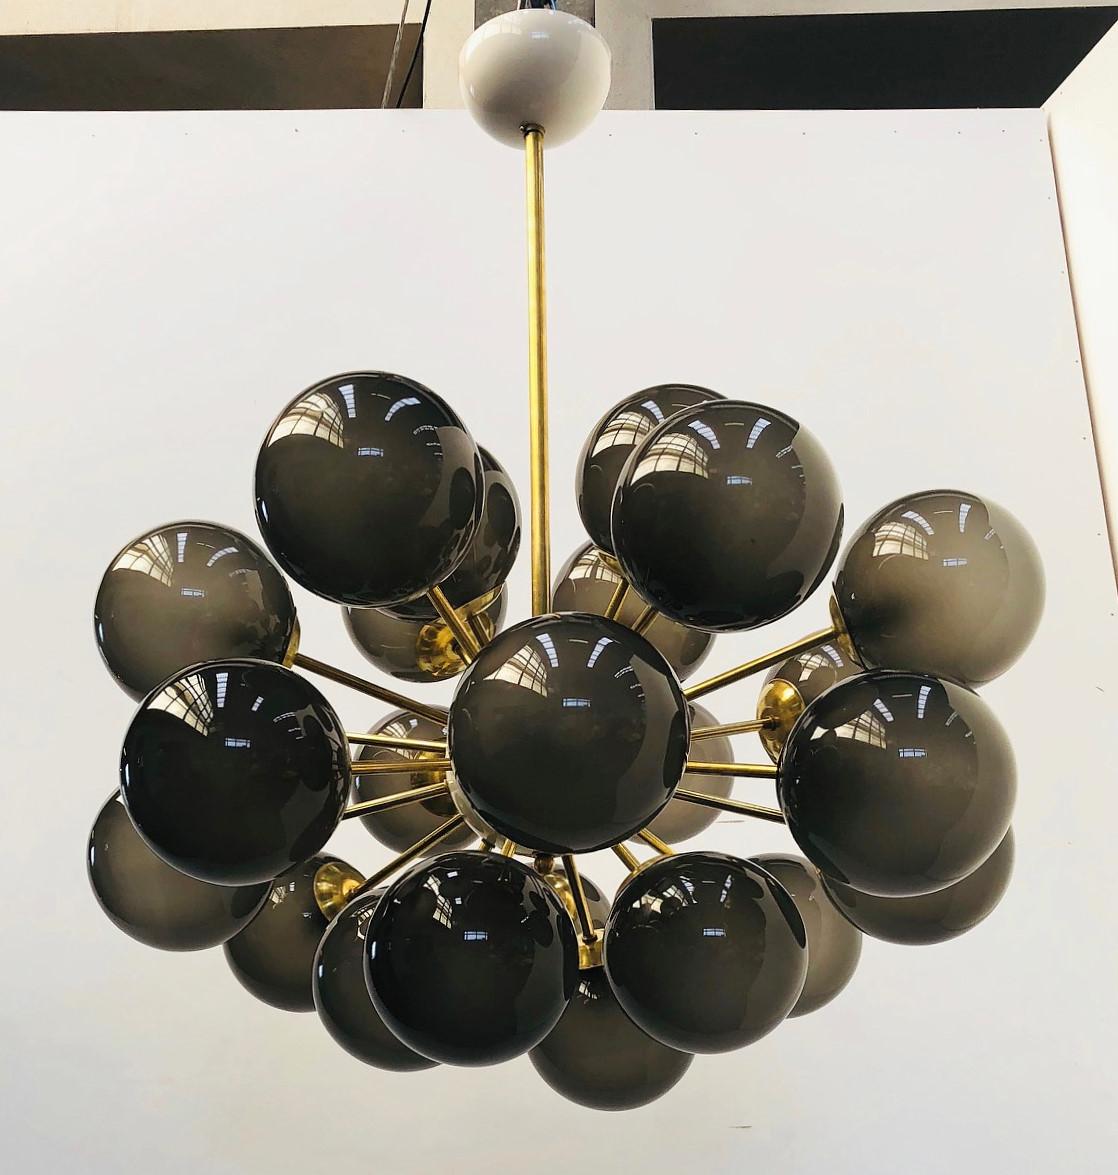 Italian oval shaped sputnik chandelier with Murano glass globes mounted on brass frame / Designed by Fabio Bergomi for Fabio Ltd / Made in Italy
24 lights / E12 or E14 type / max 40W each
Diameter: 36 inches / Total Height: 36 inches including rod